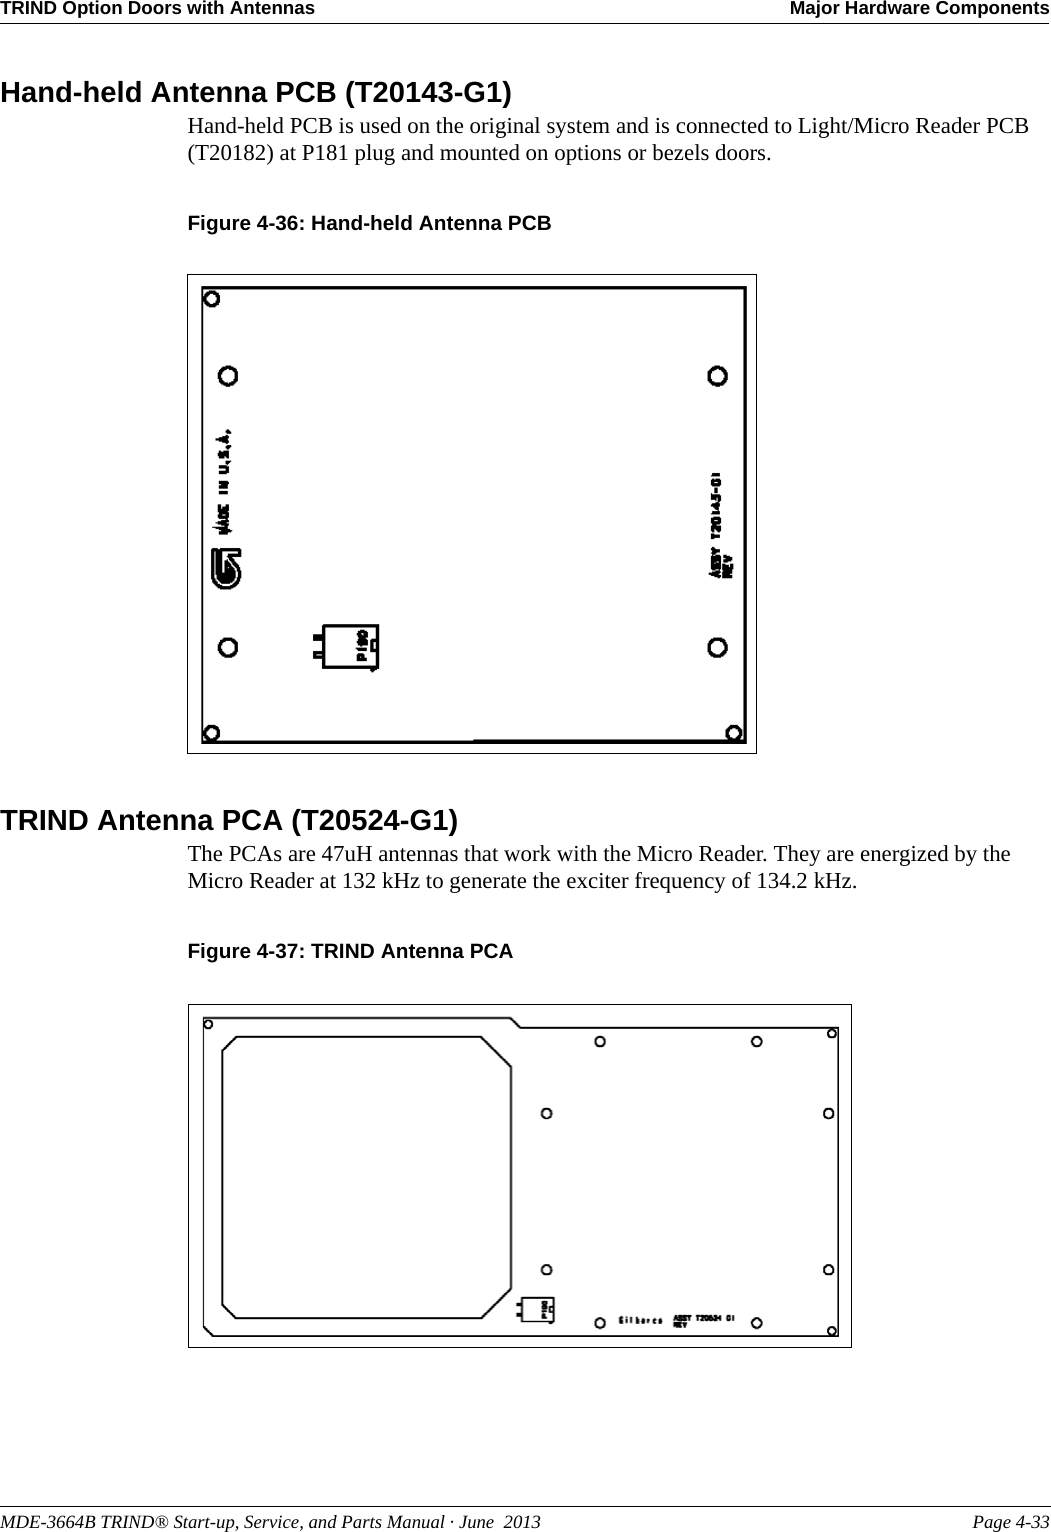 MDE-3664B TRIND® Start-up, Service, and Parts Manual · June  2013 Page 4-33TRIND Option Doors with Antennas Major Hardware ComponentsHand-held Antenna PCB (T20143-G1)Hand-held PCB is used on the original system and is connected to Light/Micro Reader PCB (T20182) at P181 plug and mounted on options or bezels doors.Figure 4-36: Hand-held Antenna PCBTRIND Antenna PCA (T20524-G1)The PCAs are 47uH antennas that work with the Micro Reader. They are energized by the Micro Reader at 132 kHz to generate the exciter frequency of 134.2 kHz.Figure 4-37: TRIND Antenna PCA